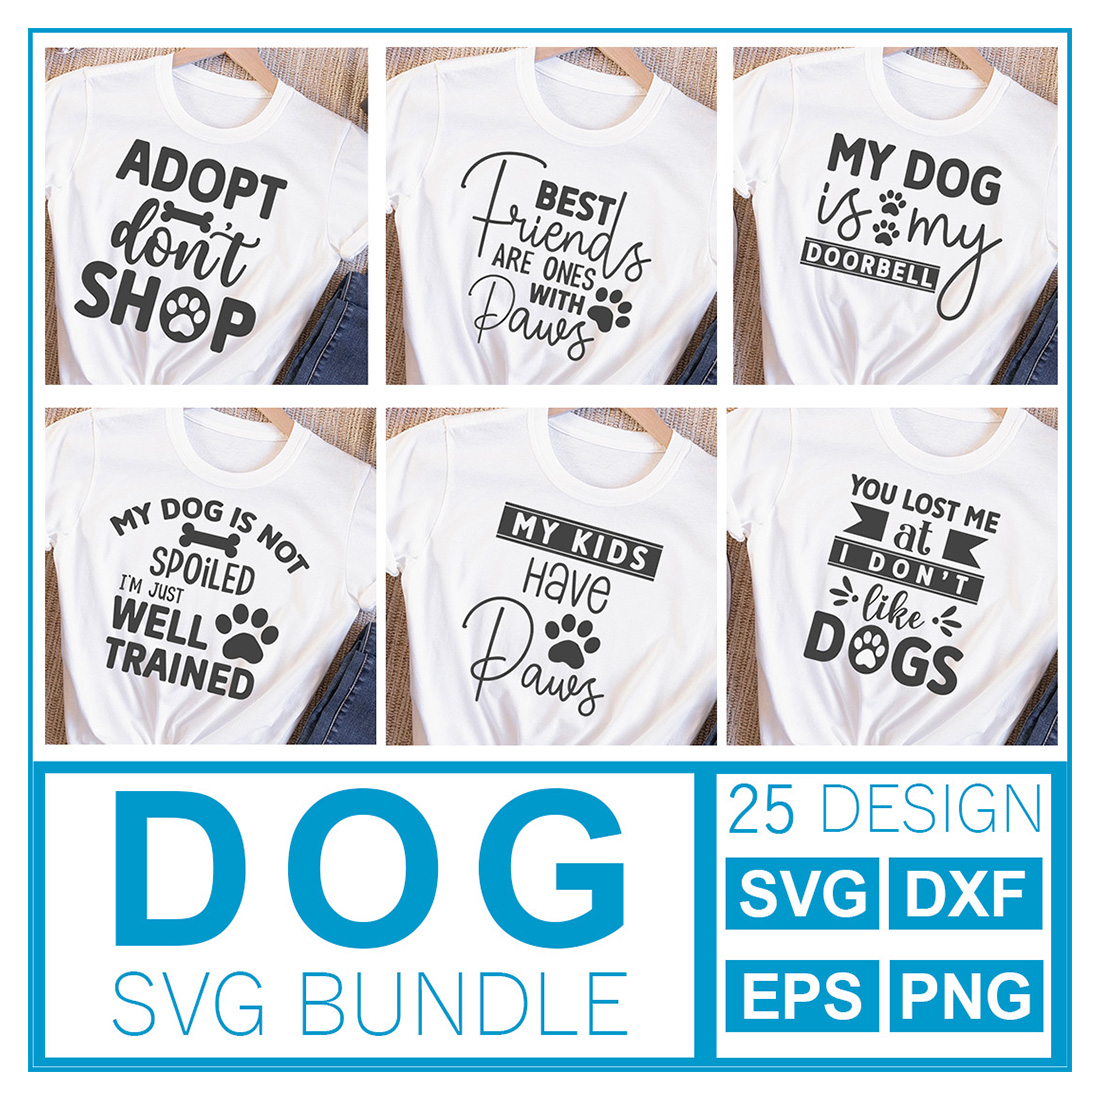 A pack of images of white t-shirts with gorgeous prints on the theme of love for dogs.